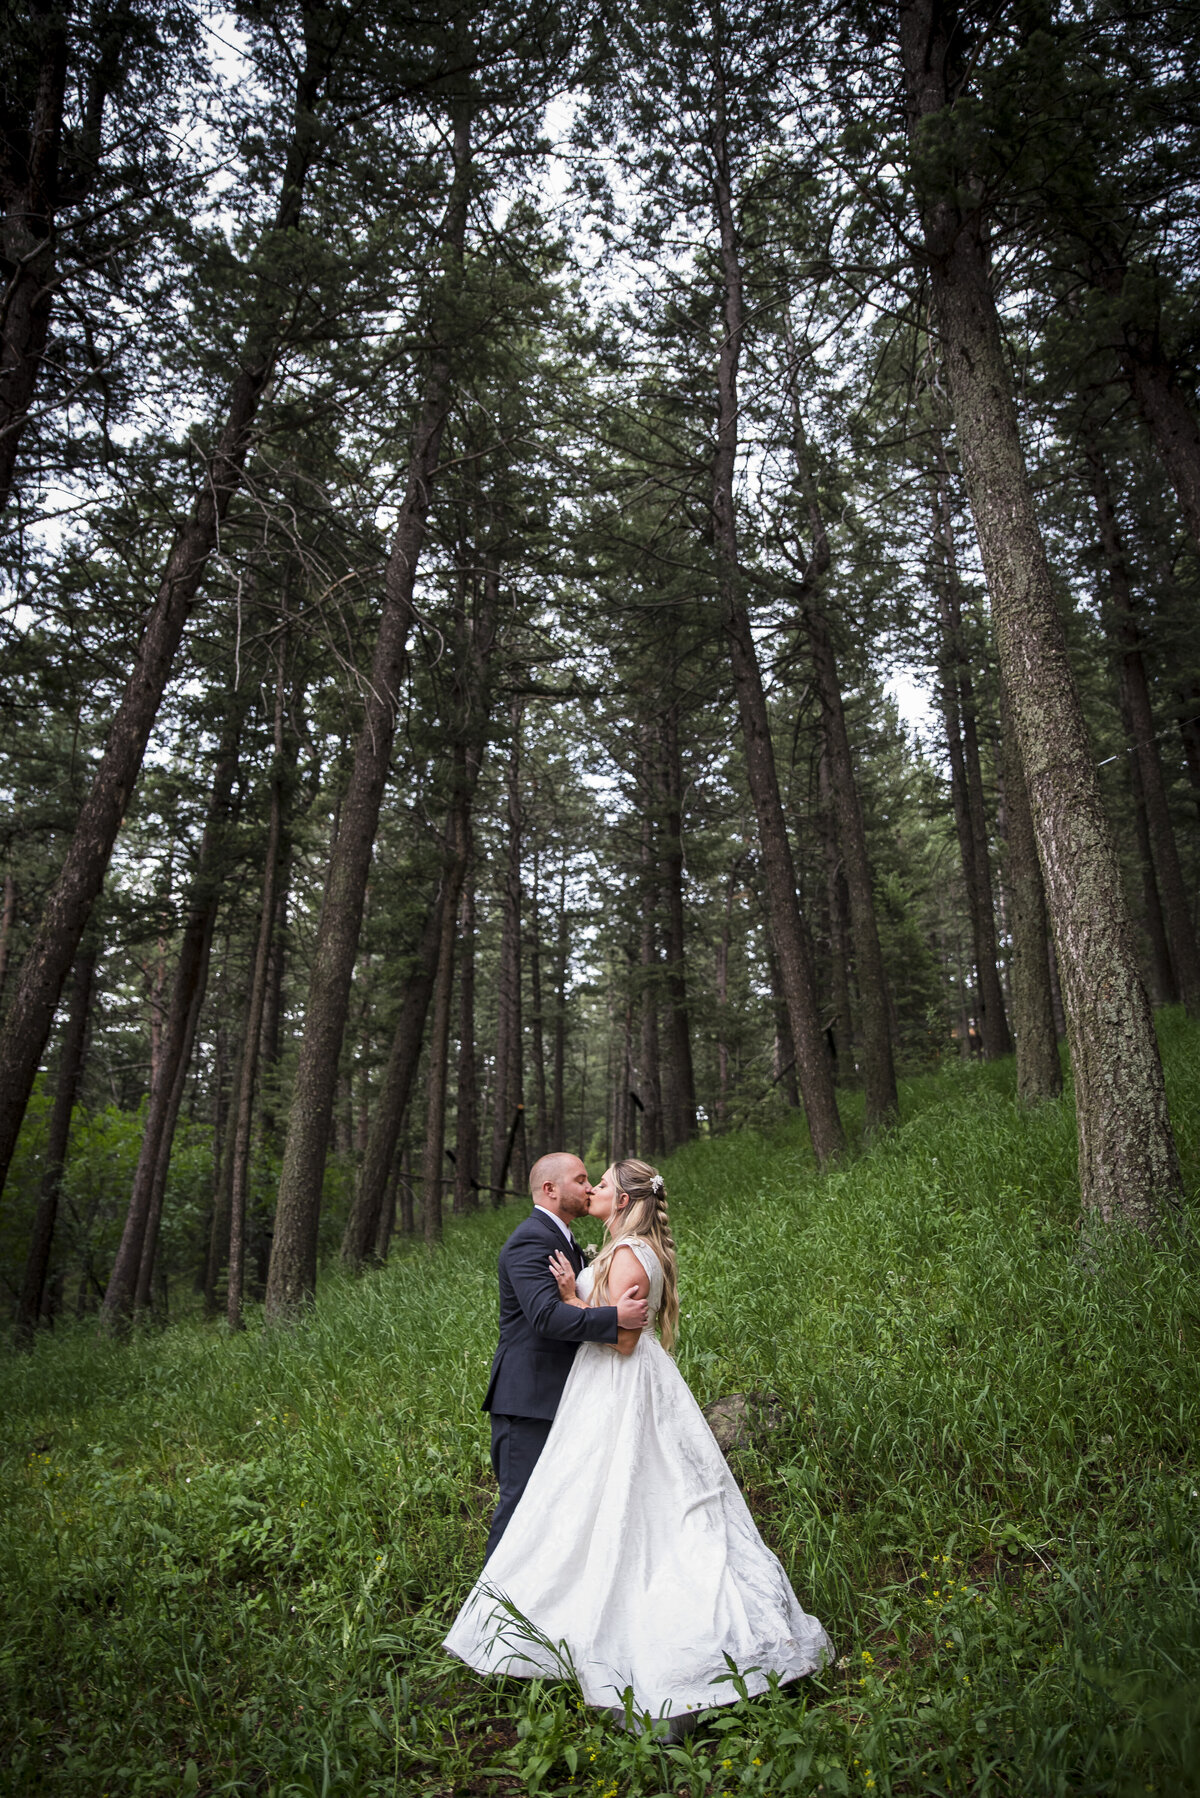 A wide angle shot of a bride and groom sharing a kiss among the pine trees at The Pines at Genesee..